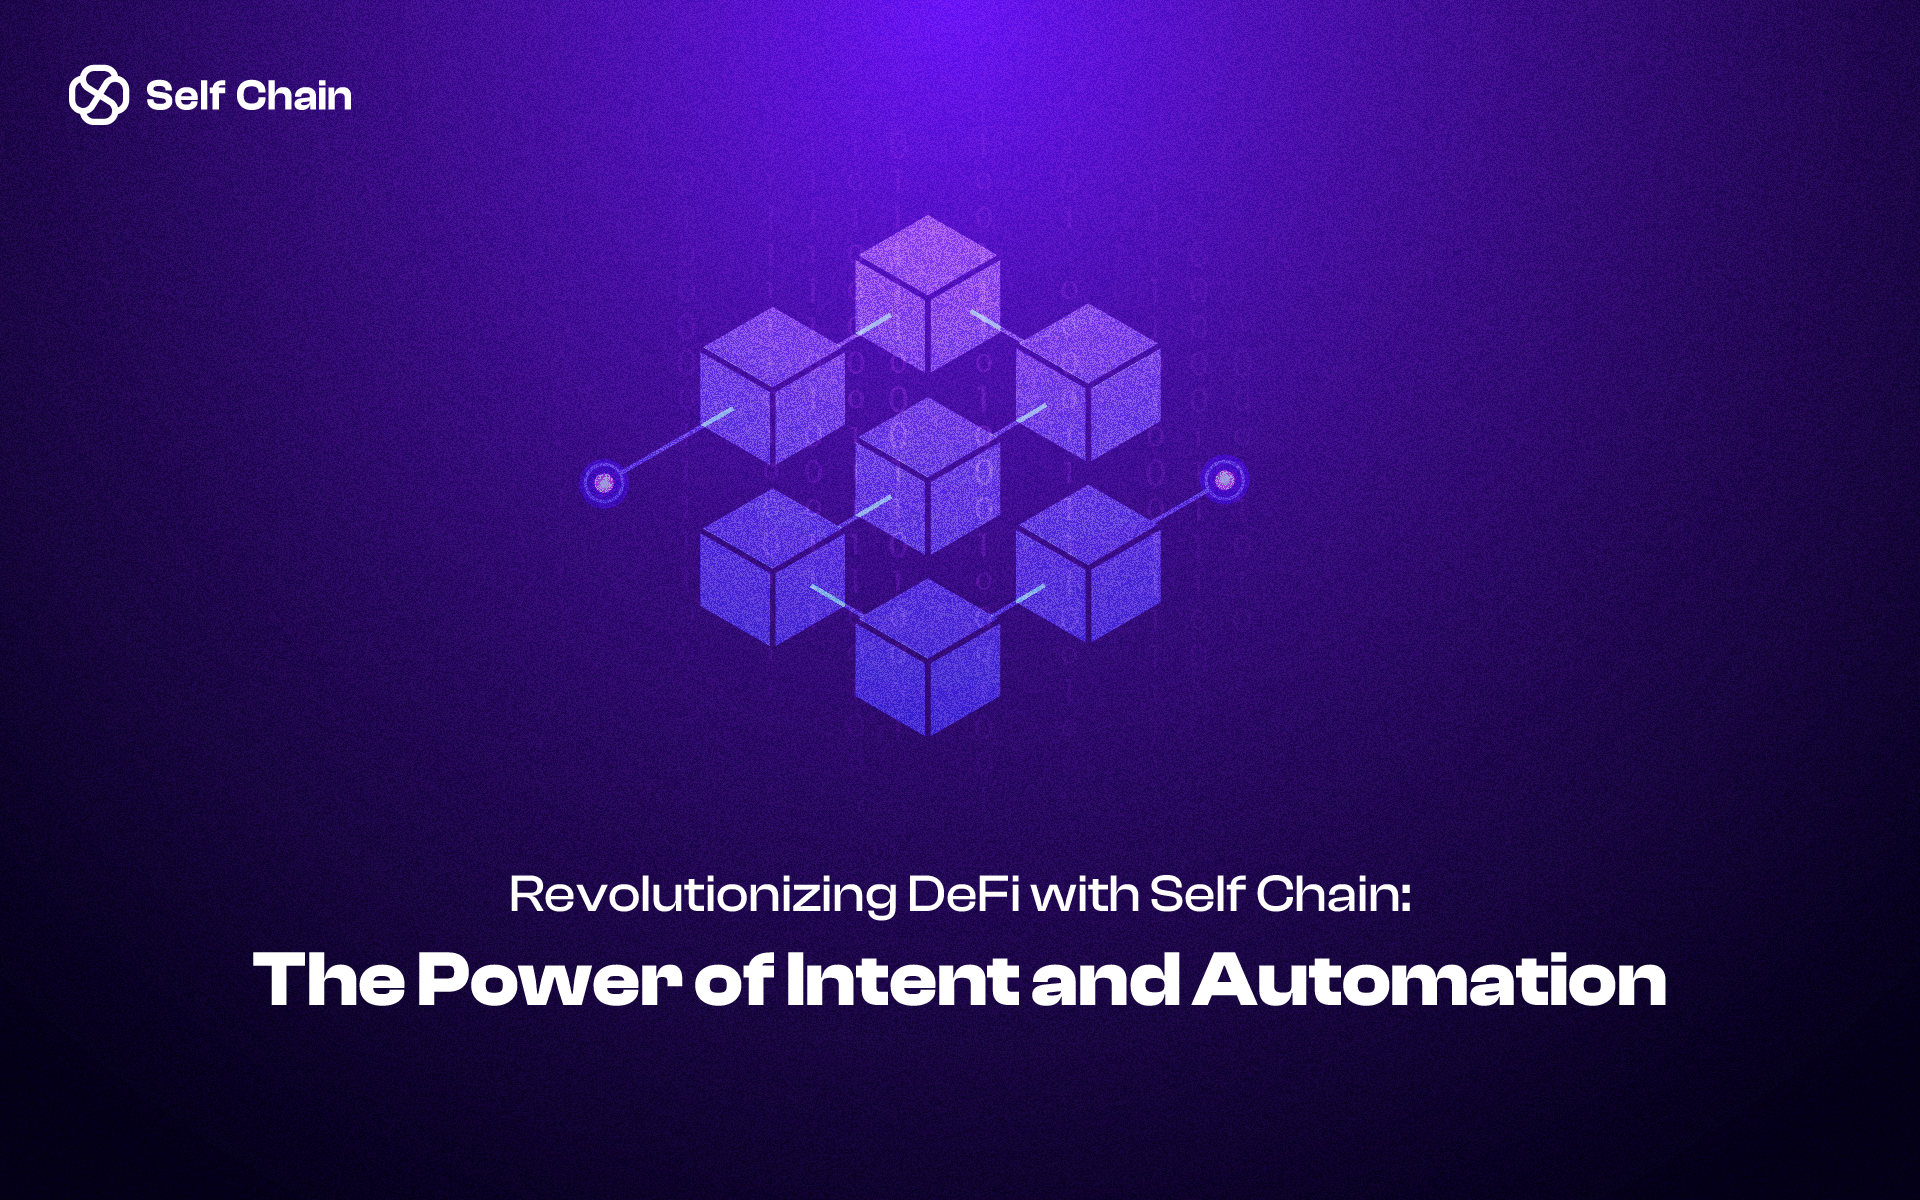 Revolutionizing DeFi with Self Chain: The Power of Intent and Automation